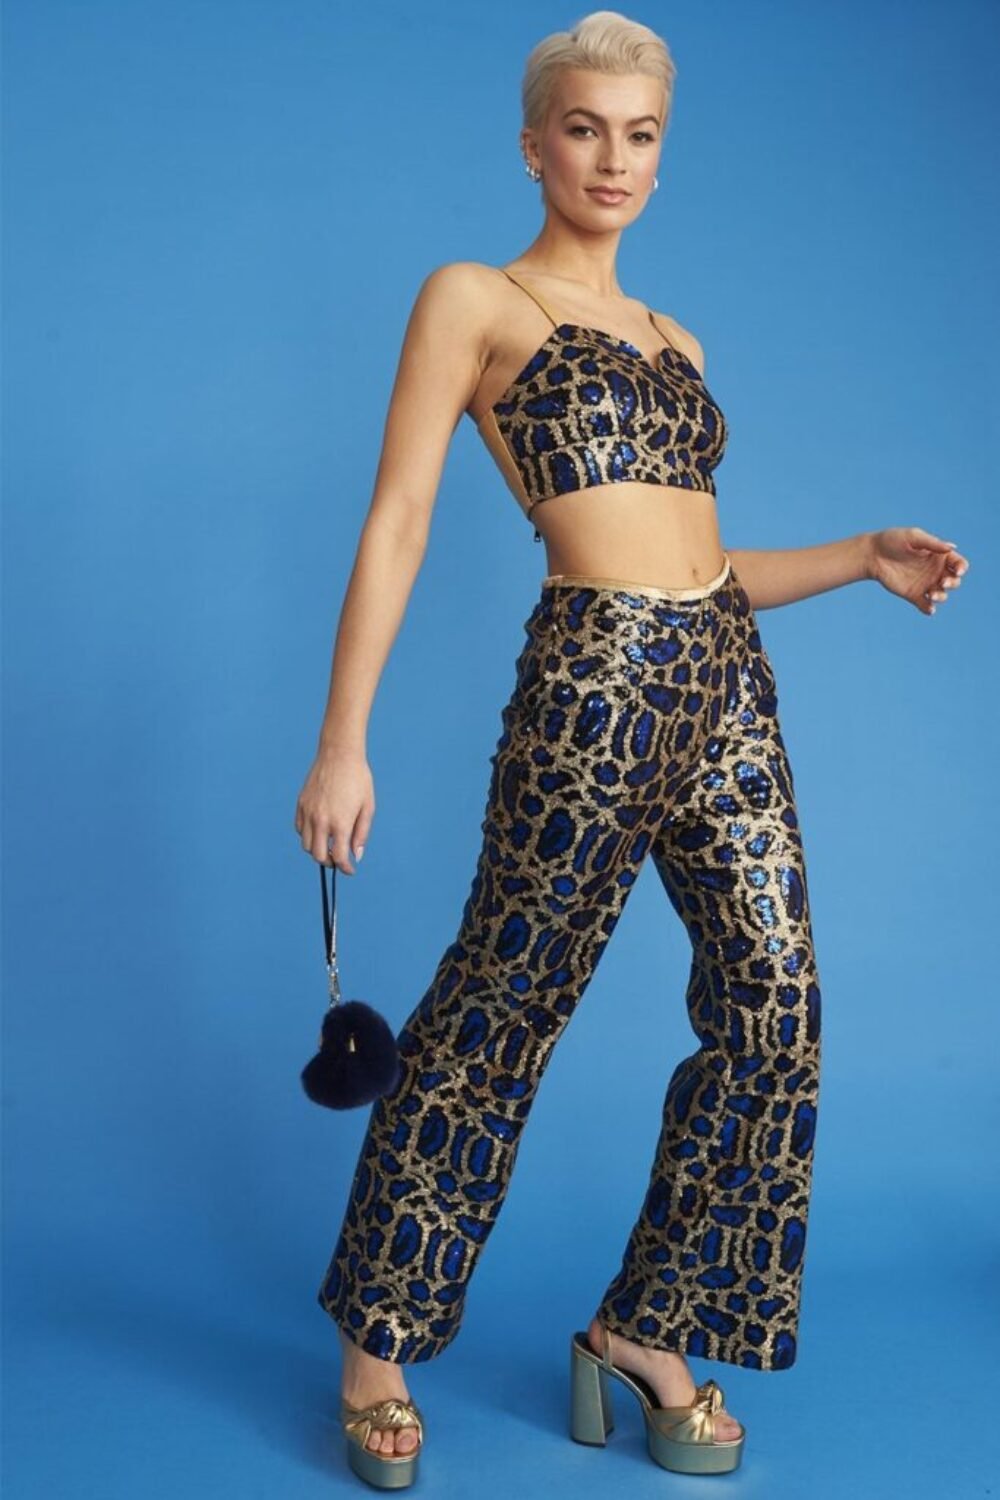 Shop Lux Blue Animal Print Sequin Bralet and women's luxury and designer clothes at www.lux-apparel.co.uk